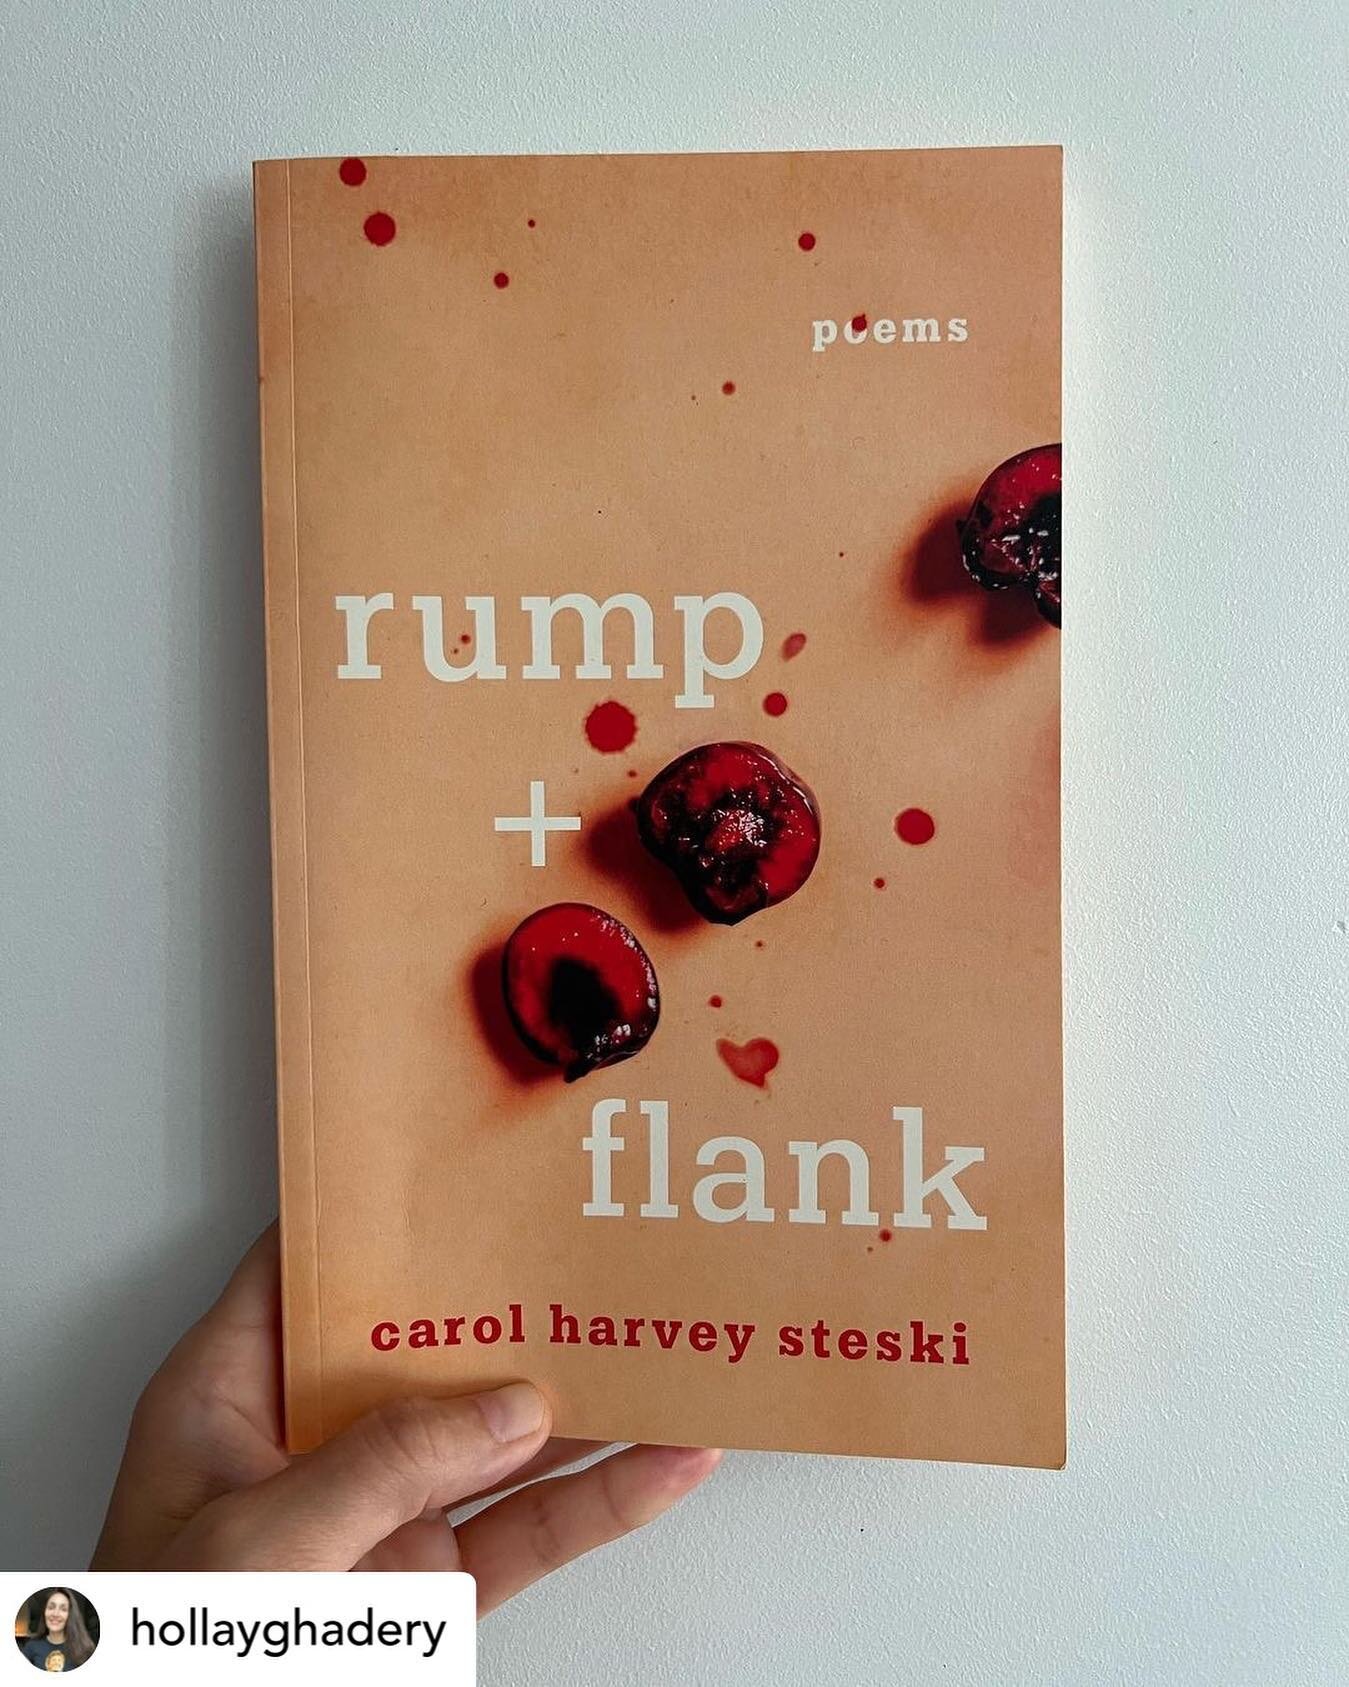 😍 Wowza! This juicy review of rump + flank by @hollayghadery is out of this world! Not to mention, rather spicy🔥🌶

She brilliantly captures its essence. Grateful. 🙏🏻

Posted @withregram &bull; @hollayghadery rump + flank (poems) by Carol Harvey 